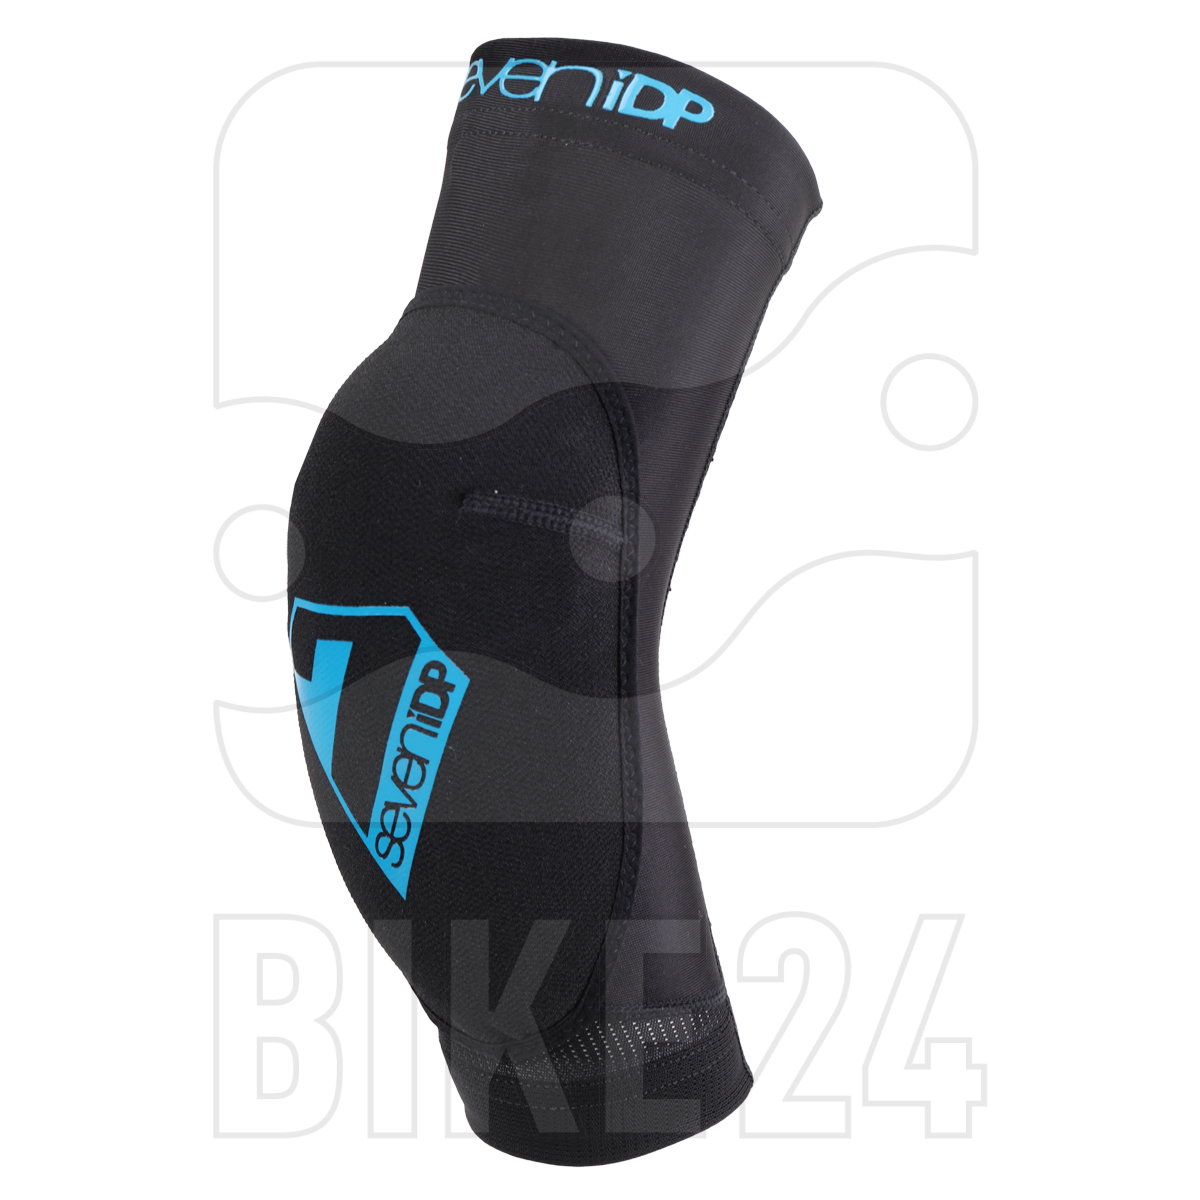 Productfoto van 7 Protection 7iDP Transition Youth Elbow Pads - black-blue